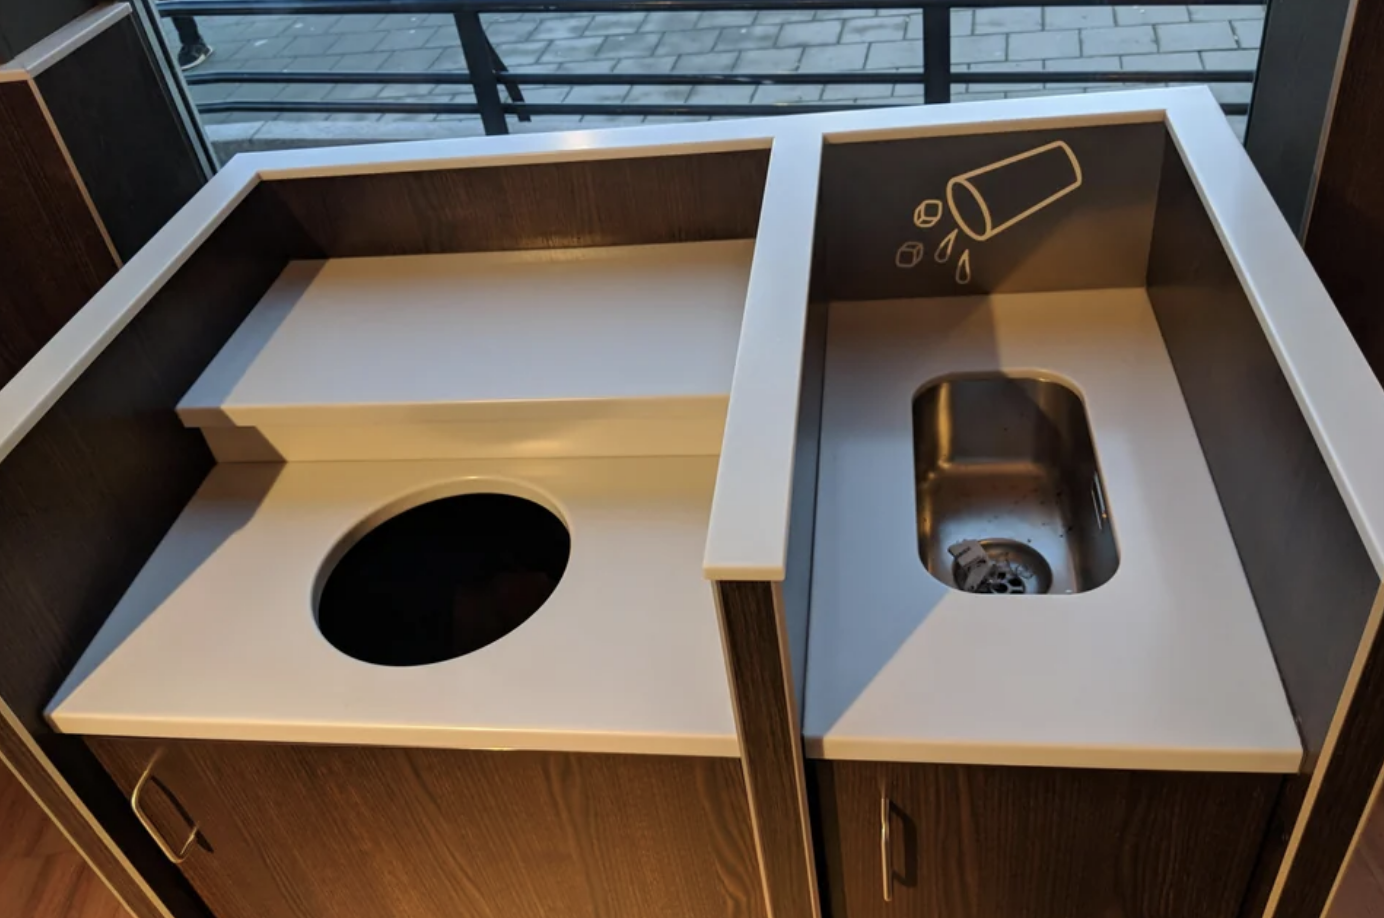 The trash can and mini sink are part of the same structure and are right next to each other for ease of use